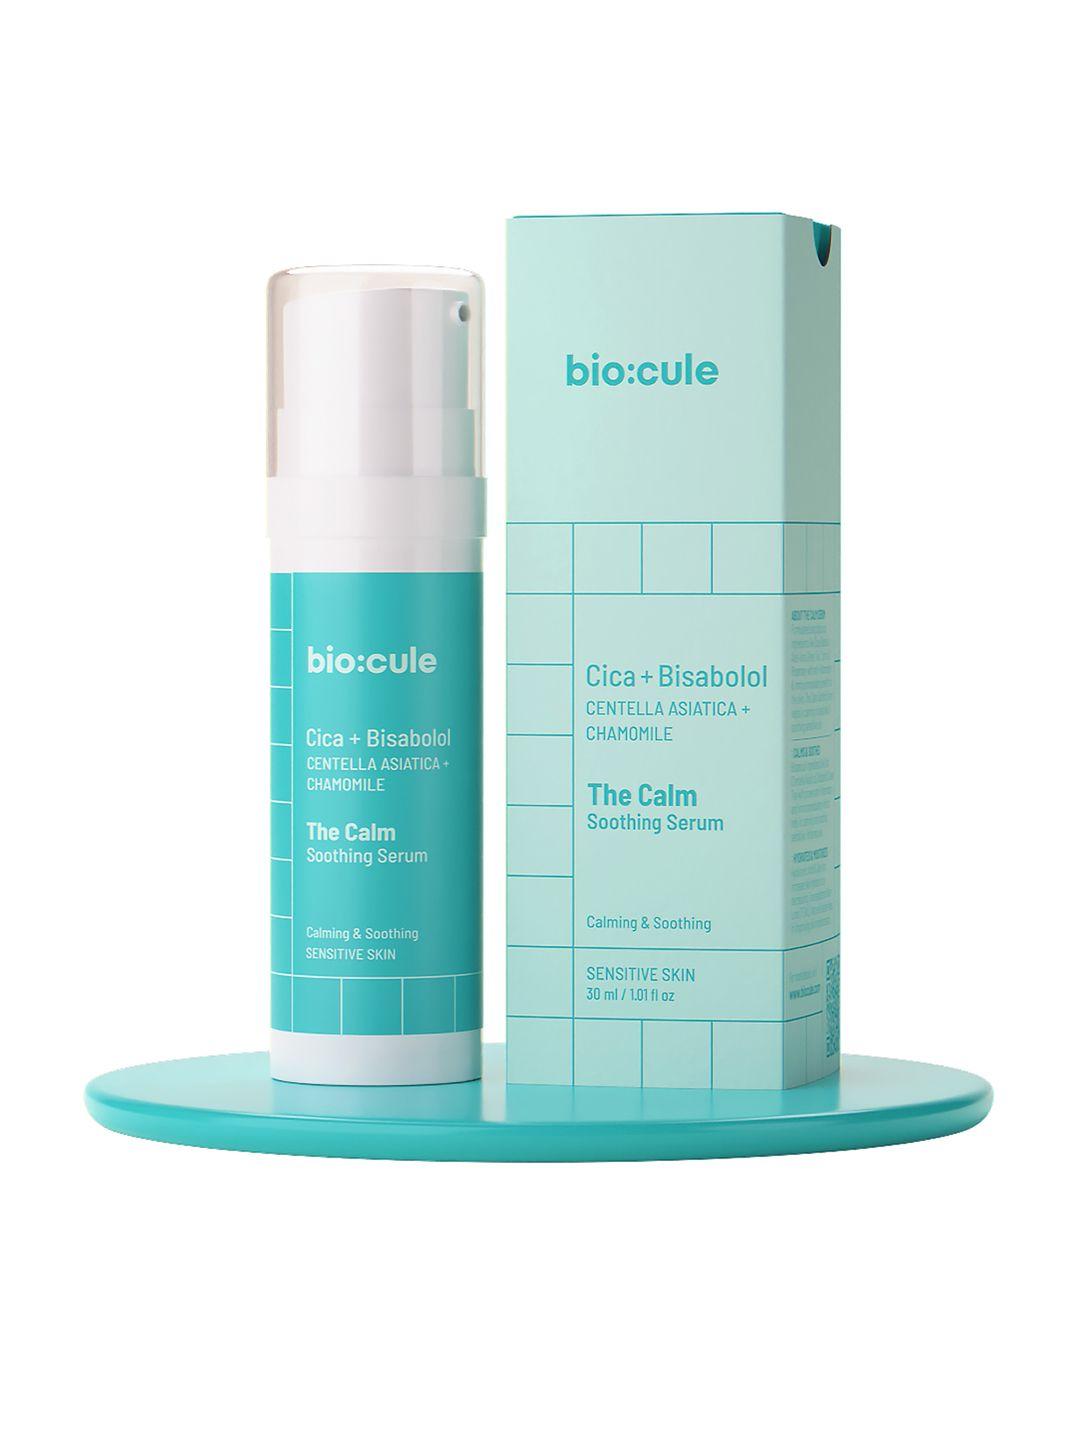 biocule the calm soothing face serum - 30ml